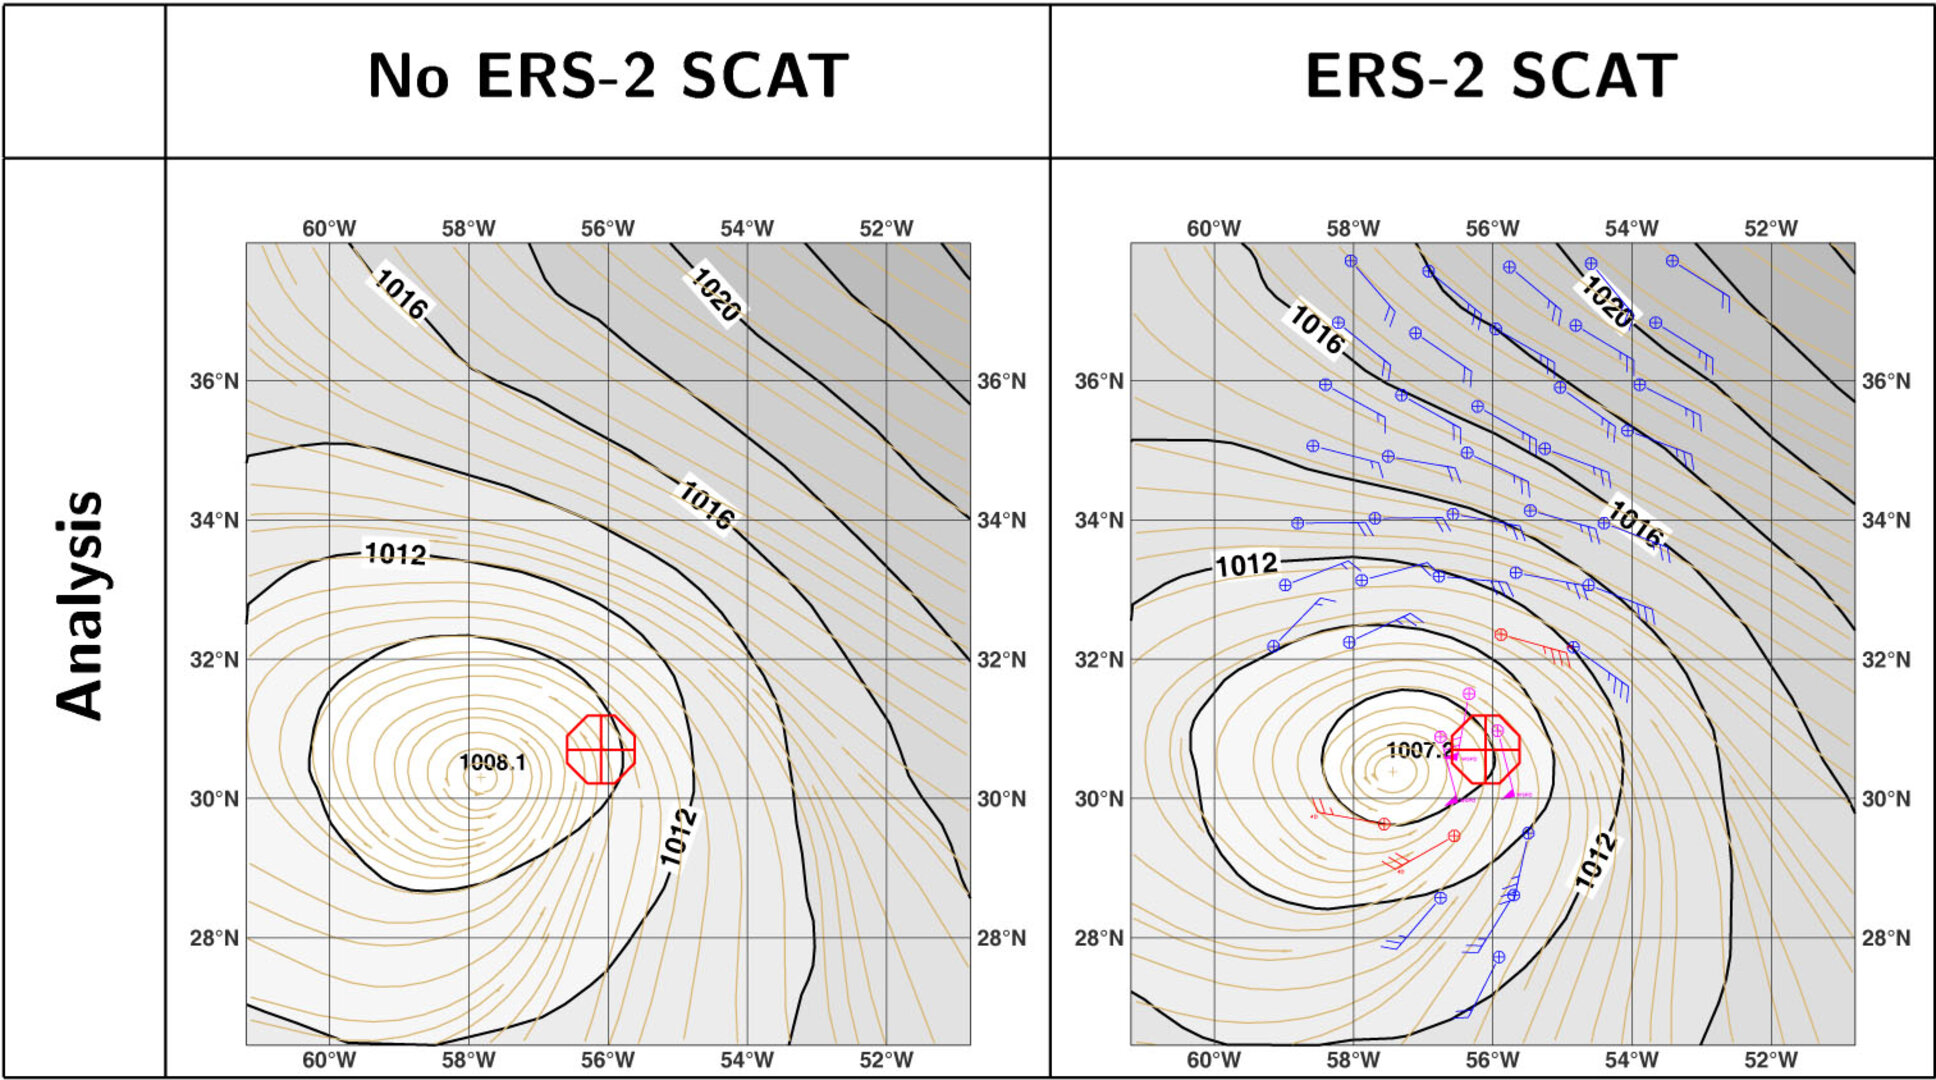 ECMWF analysis for hurricane Kate, with and without ERS-2 data